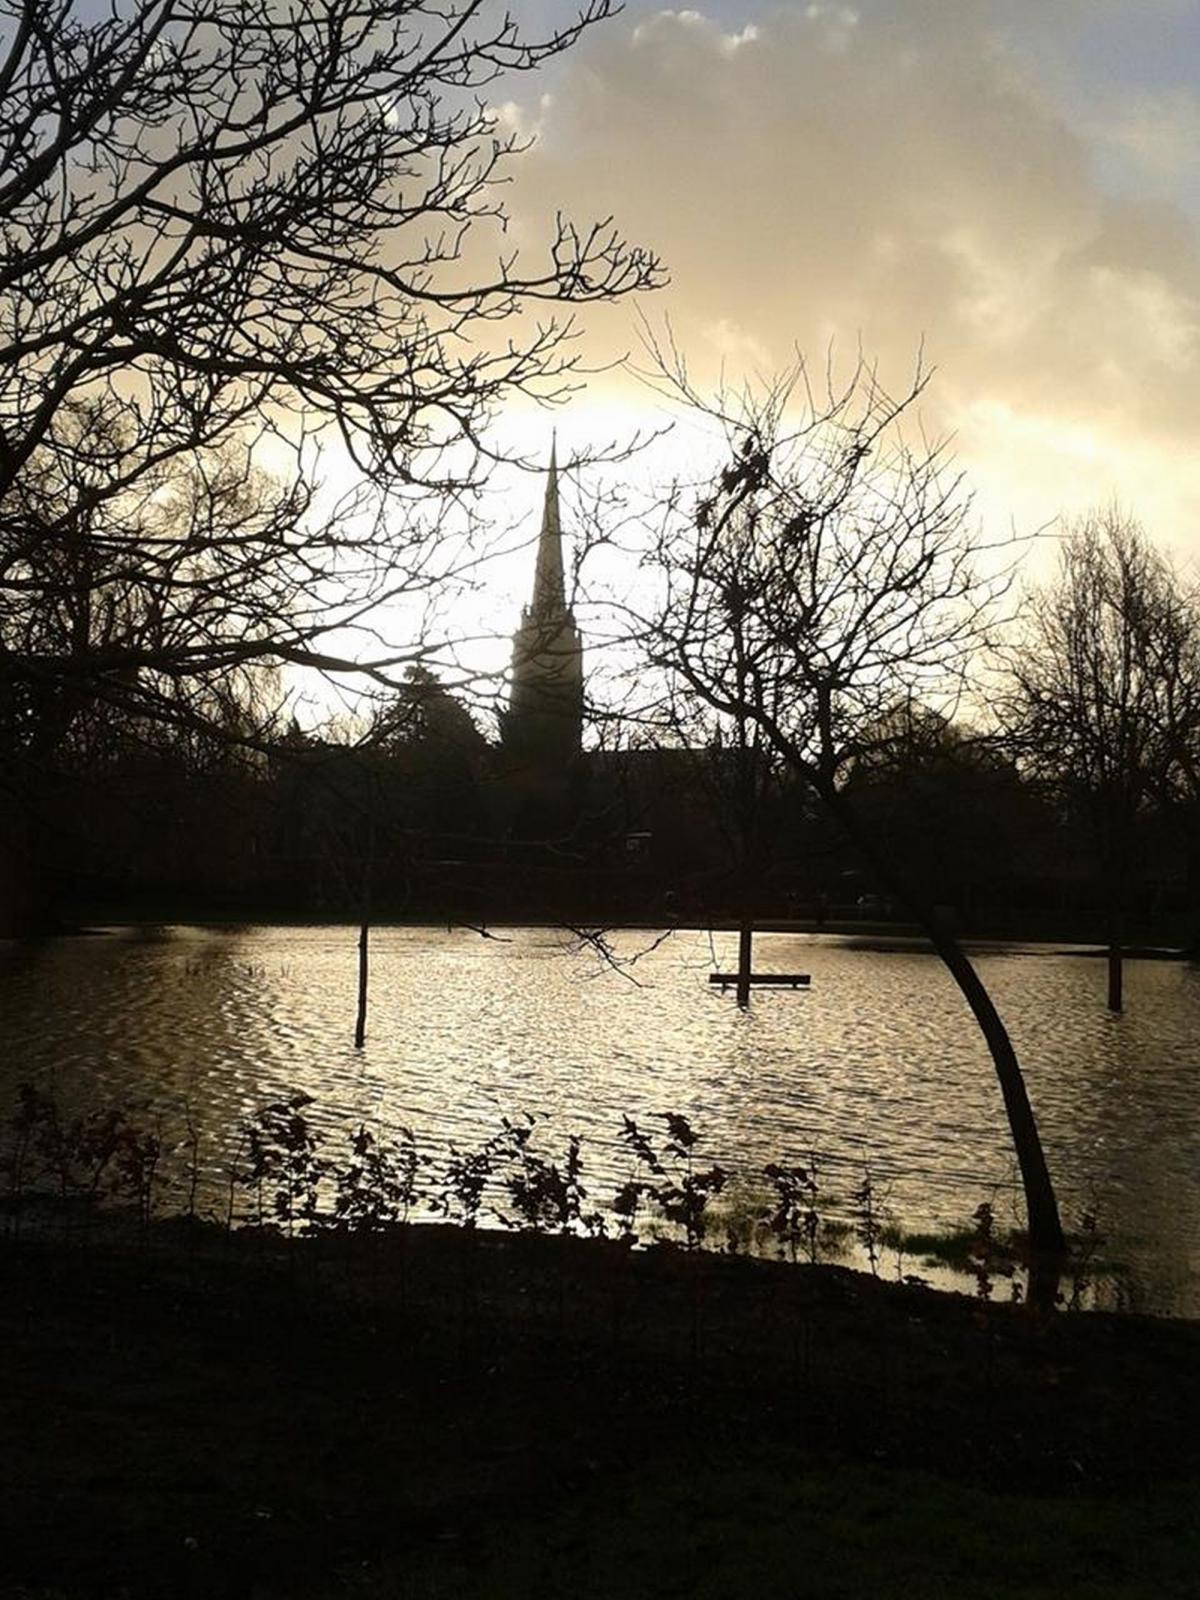 Ali Blackwell sent this picture of flooding in Queen Elizabeth Gardens.